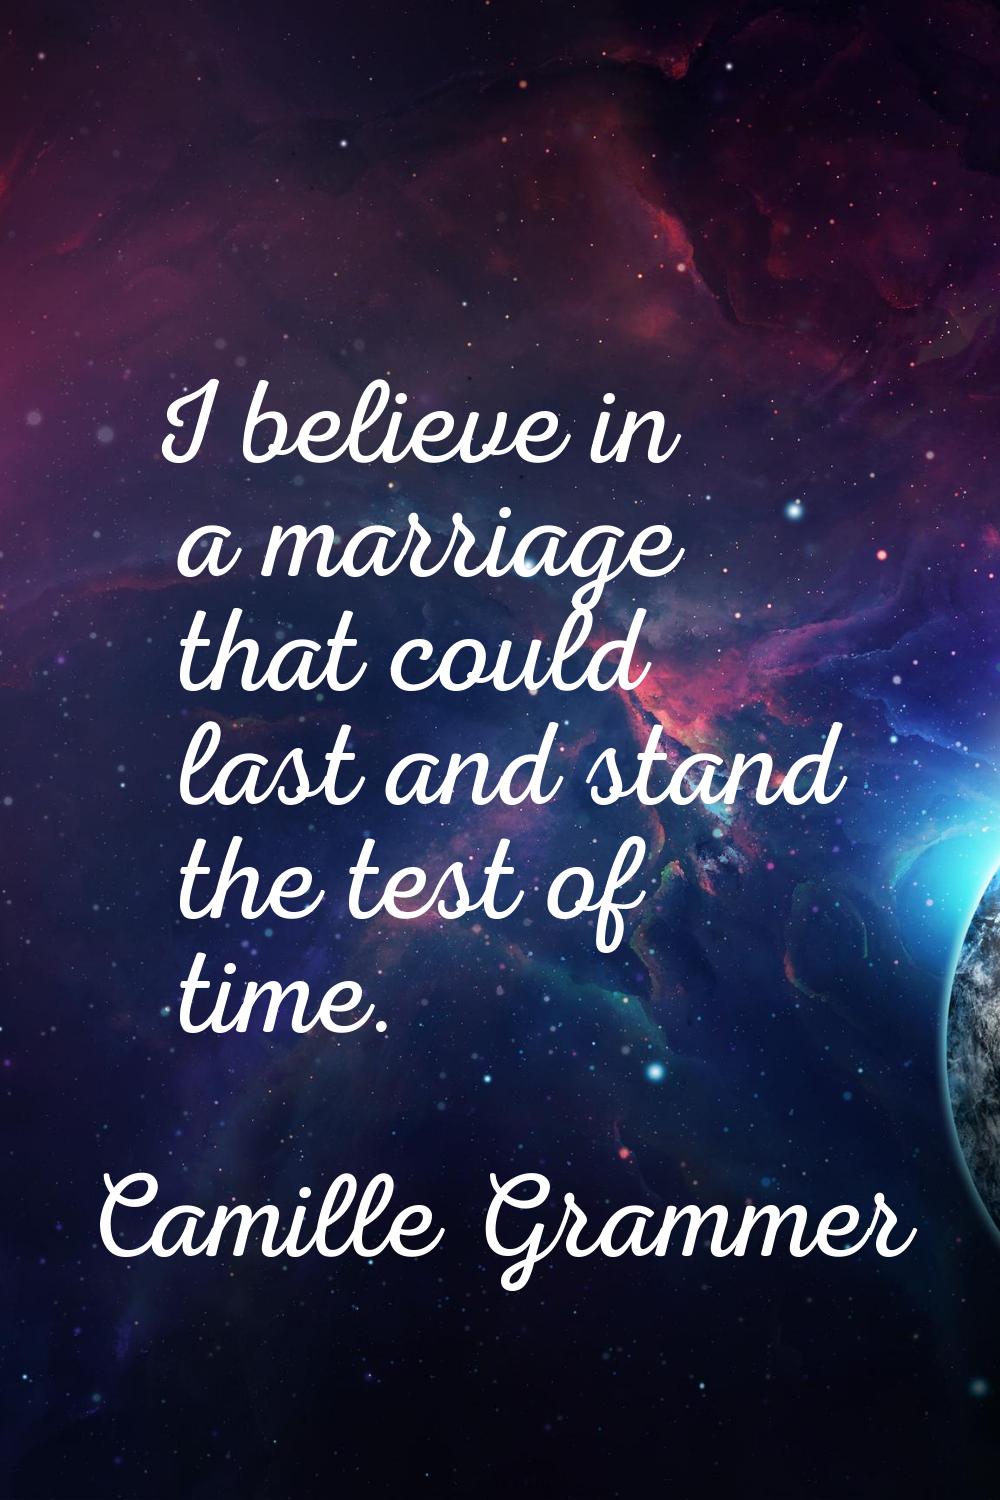 I believe in a marriage that could last and stand the test of time.